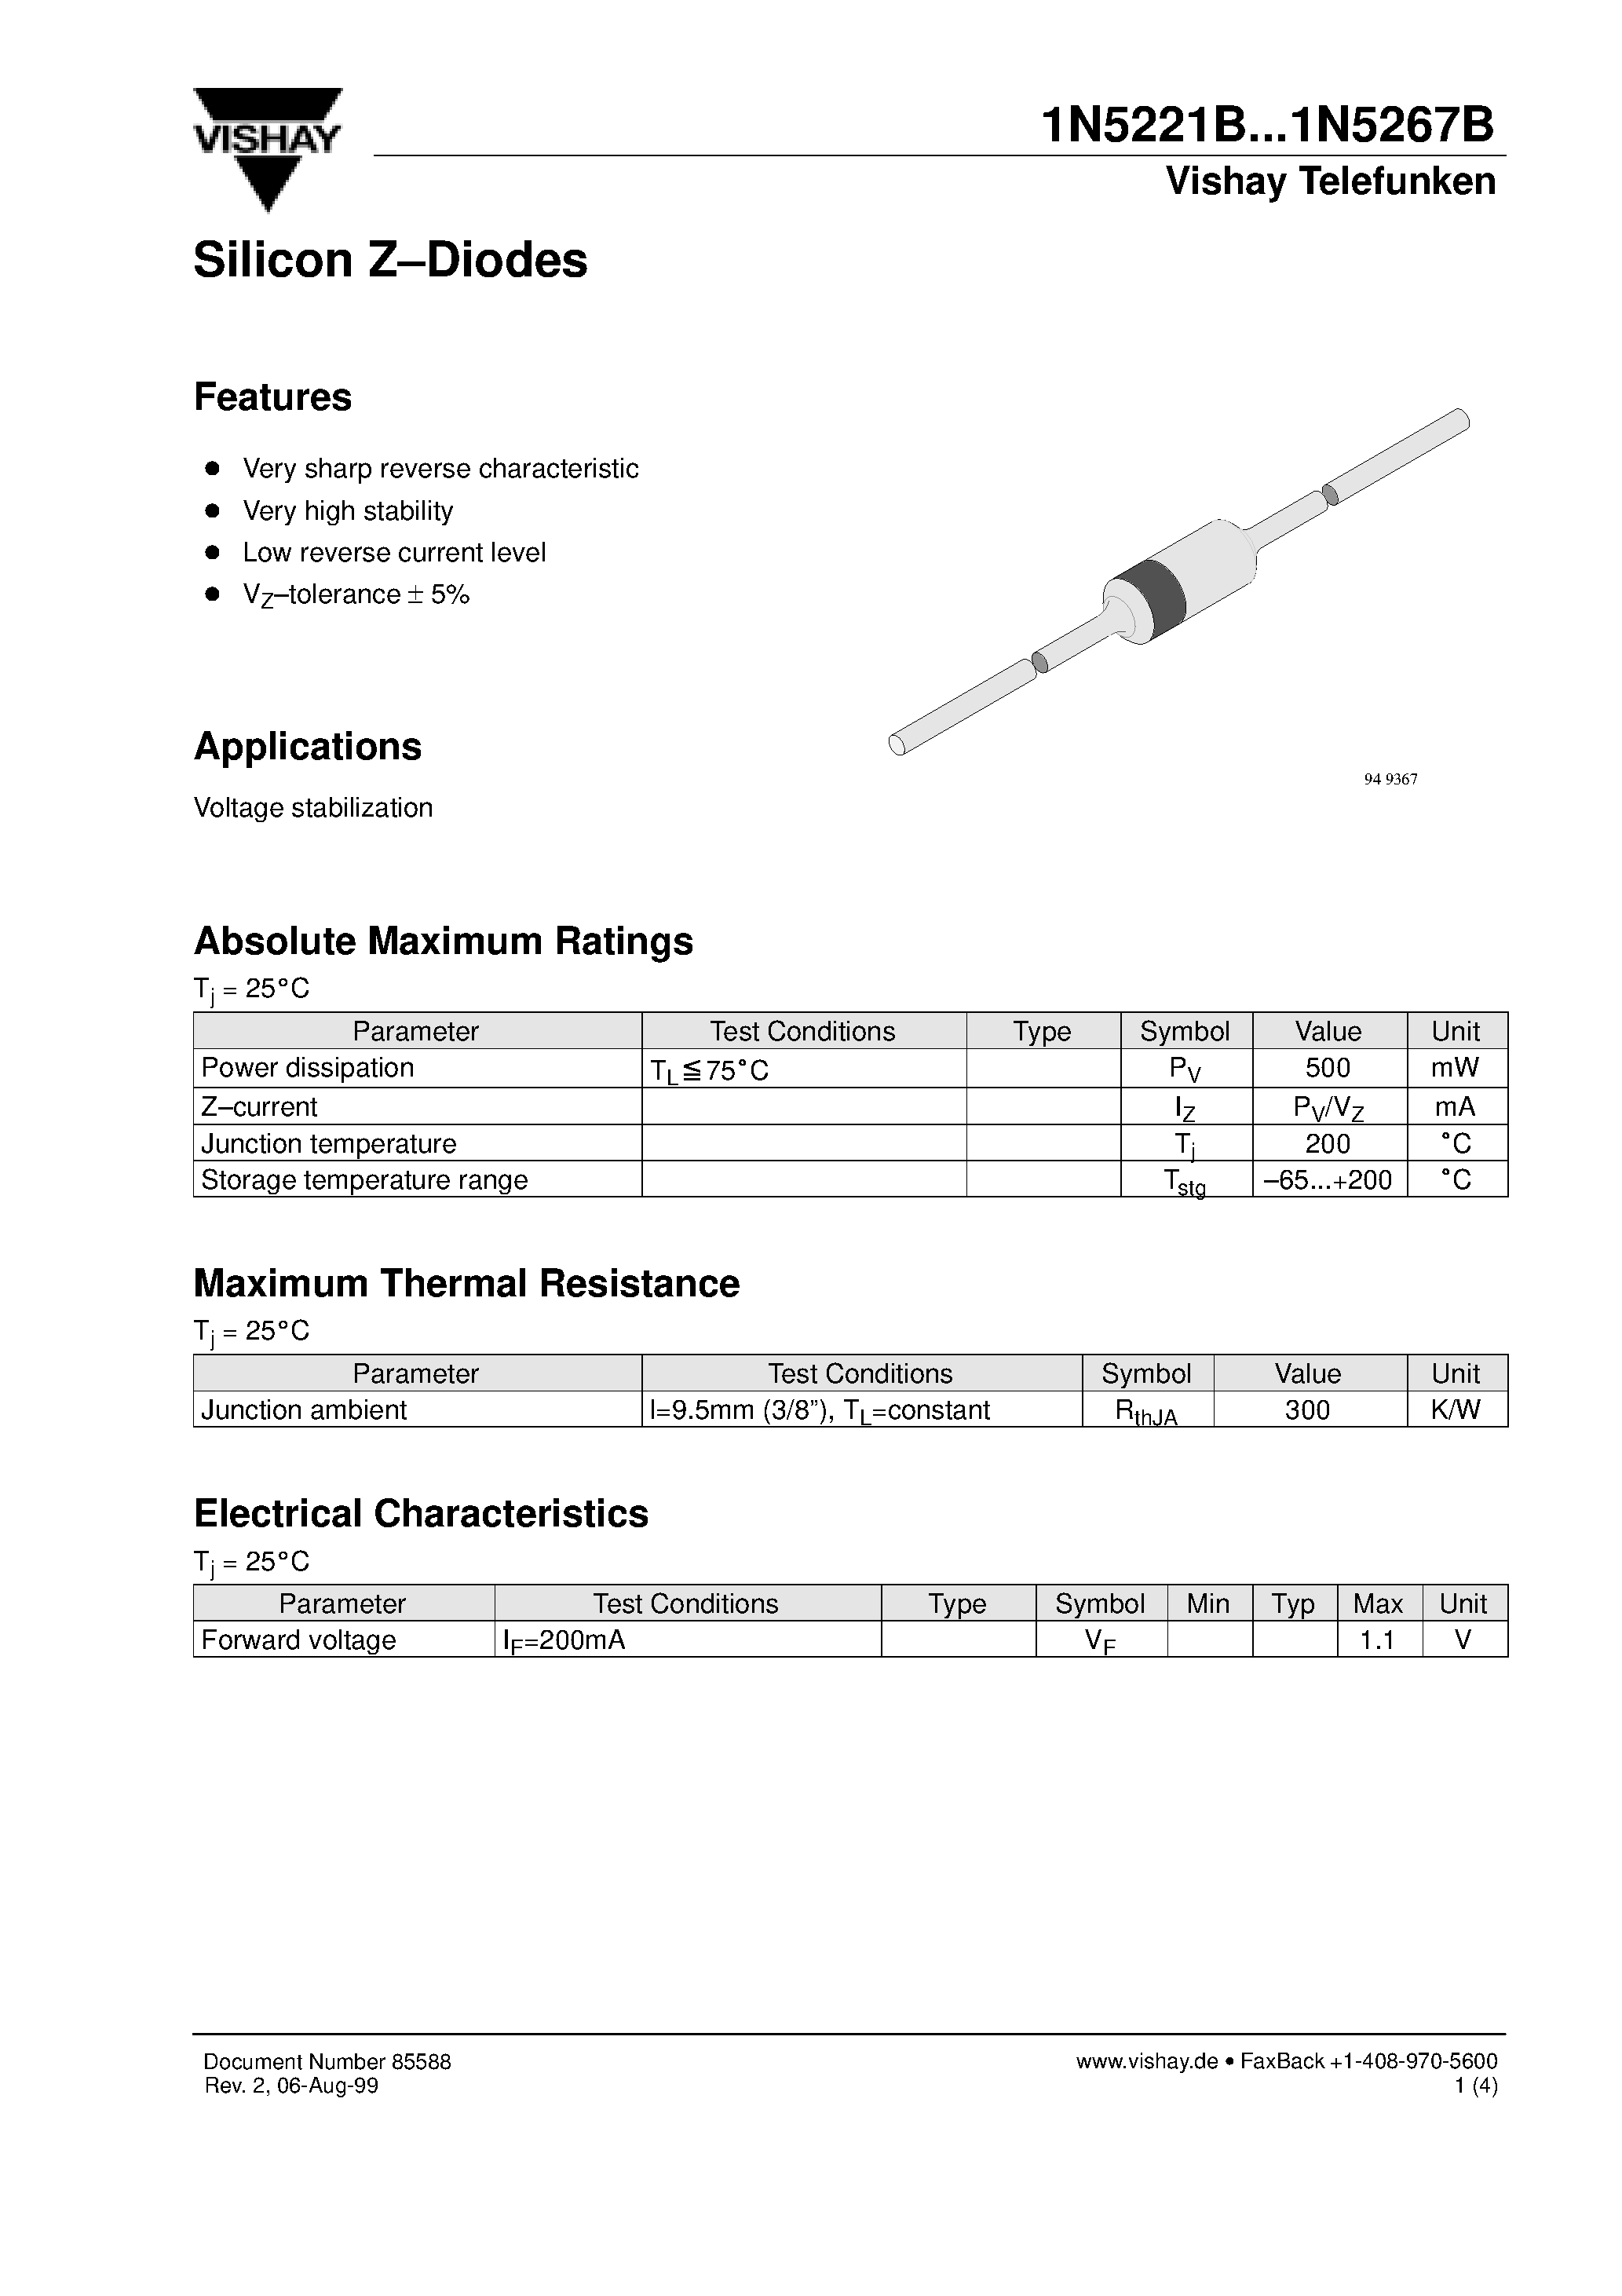 Datasheet 1N5228B - Silicon Z-Diodes page 1